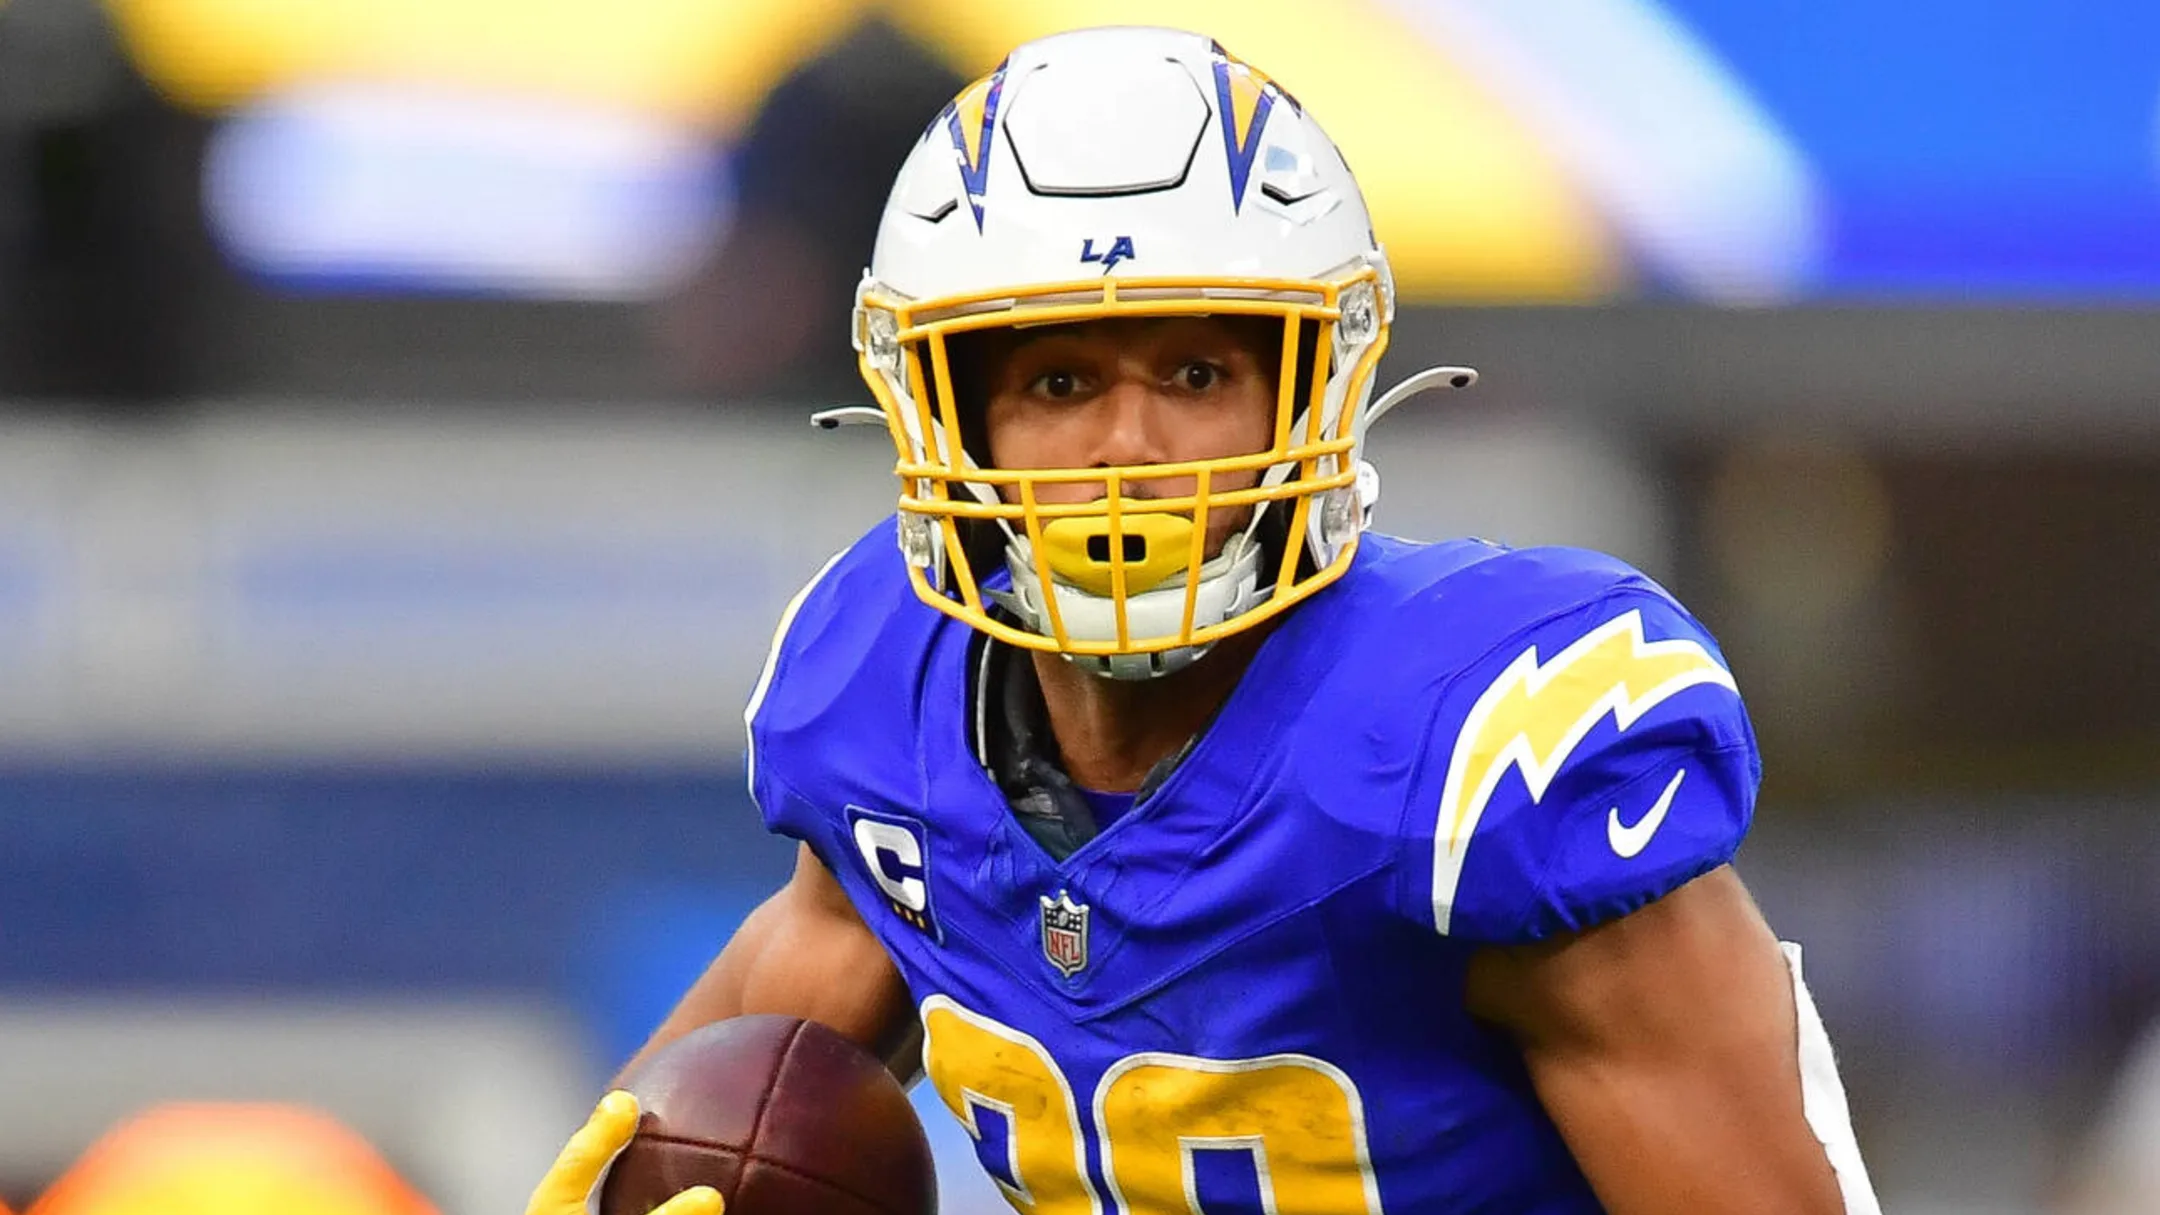 How Austin Ekeler's Big Move Shakes Up the NFL: A Closer Look at His Switch to the Commanders